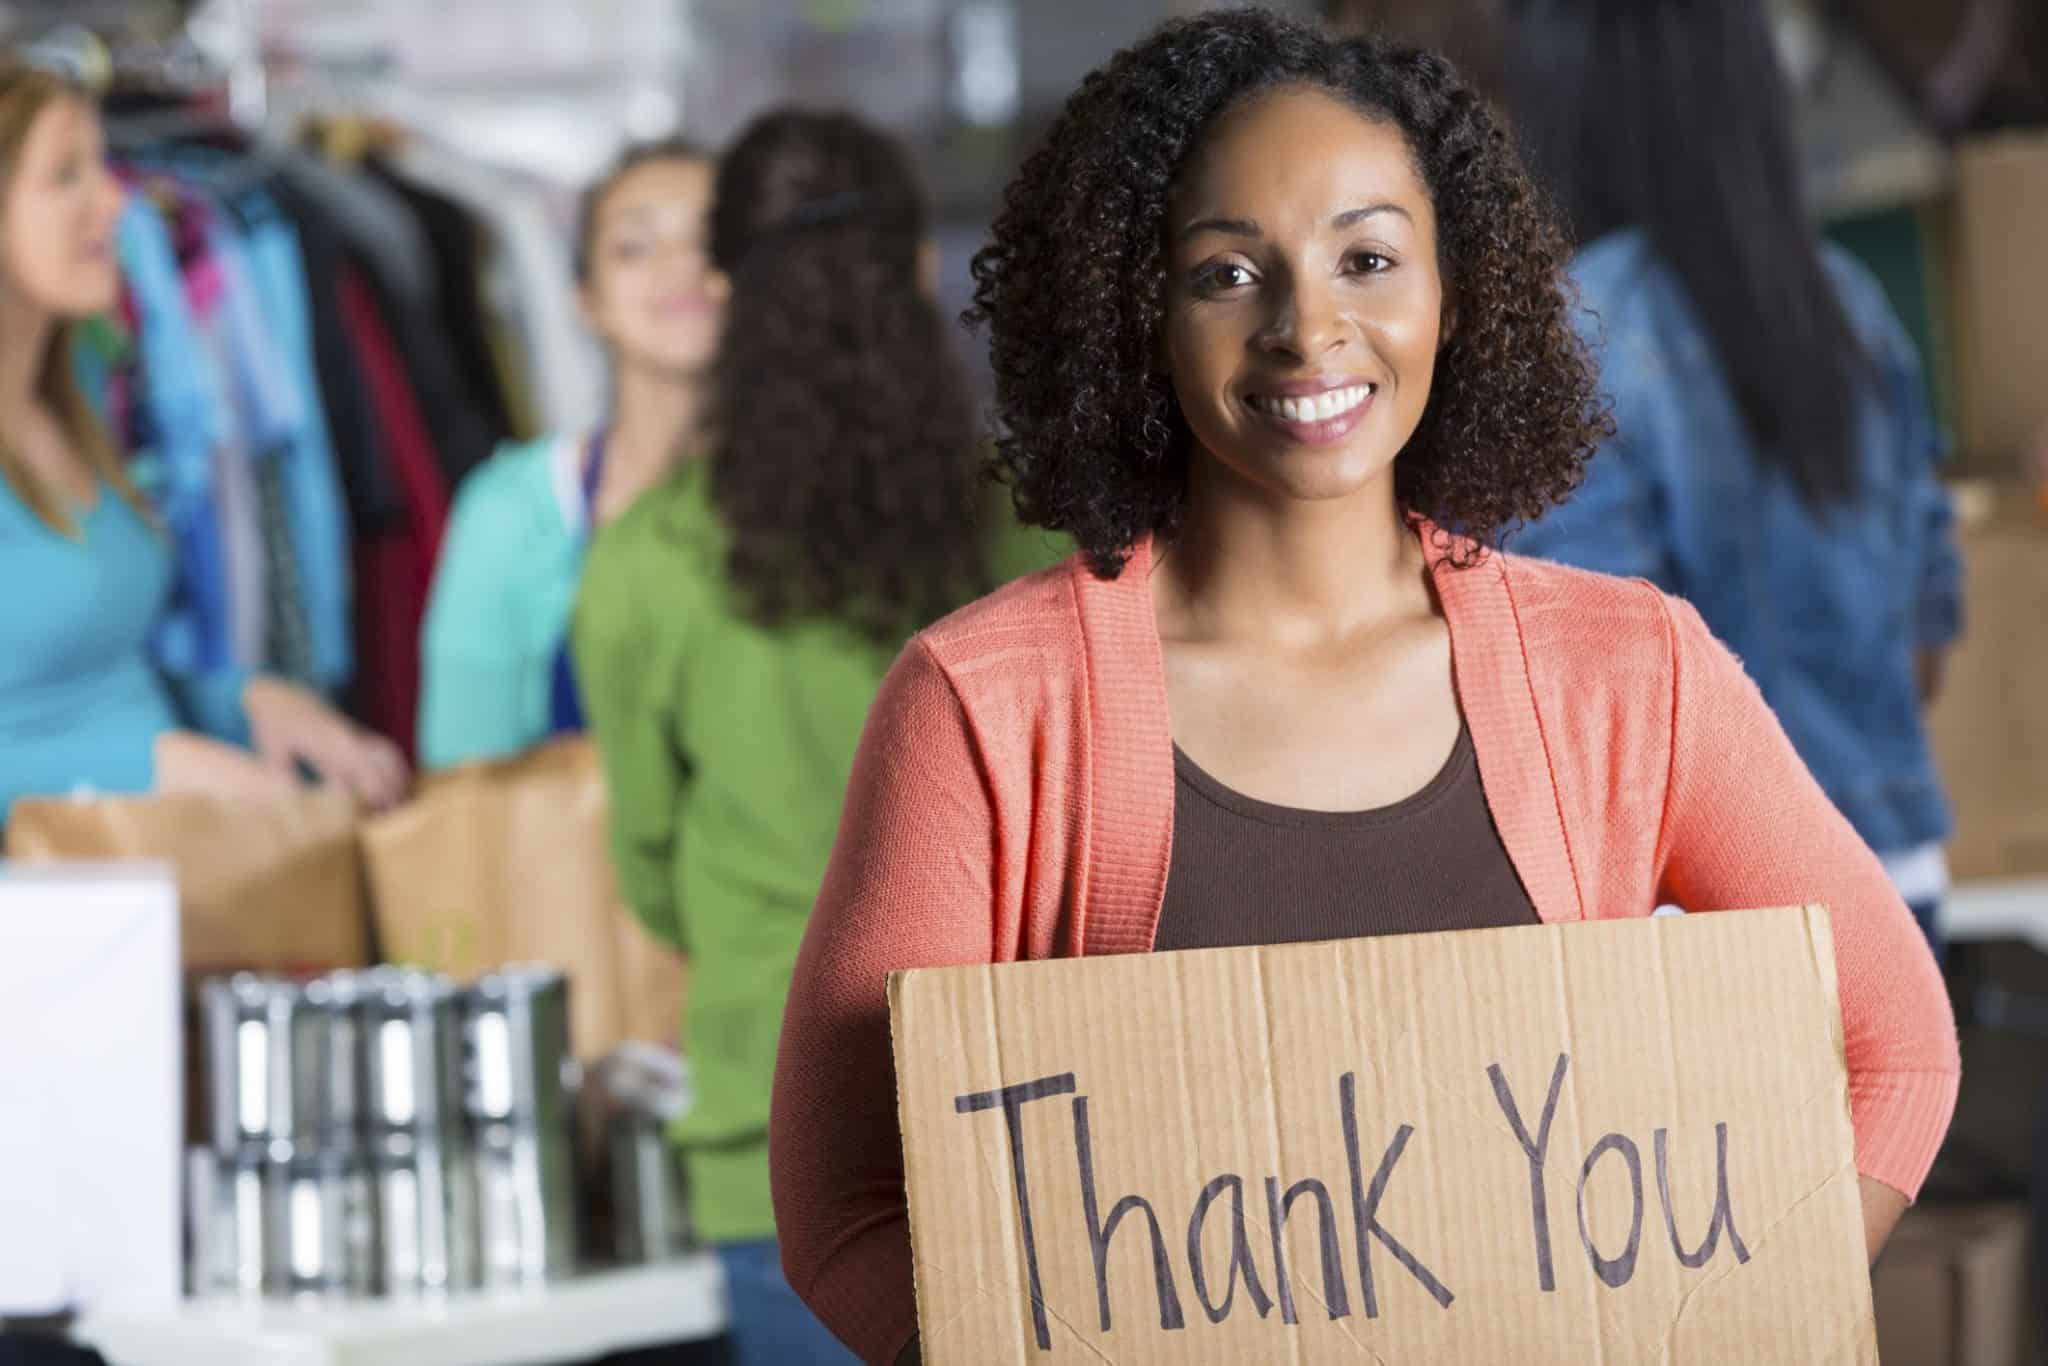 A sign saying "Thank You" in a clothing closet, expressing gratitude for the importance of a thank you message